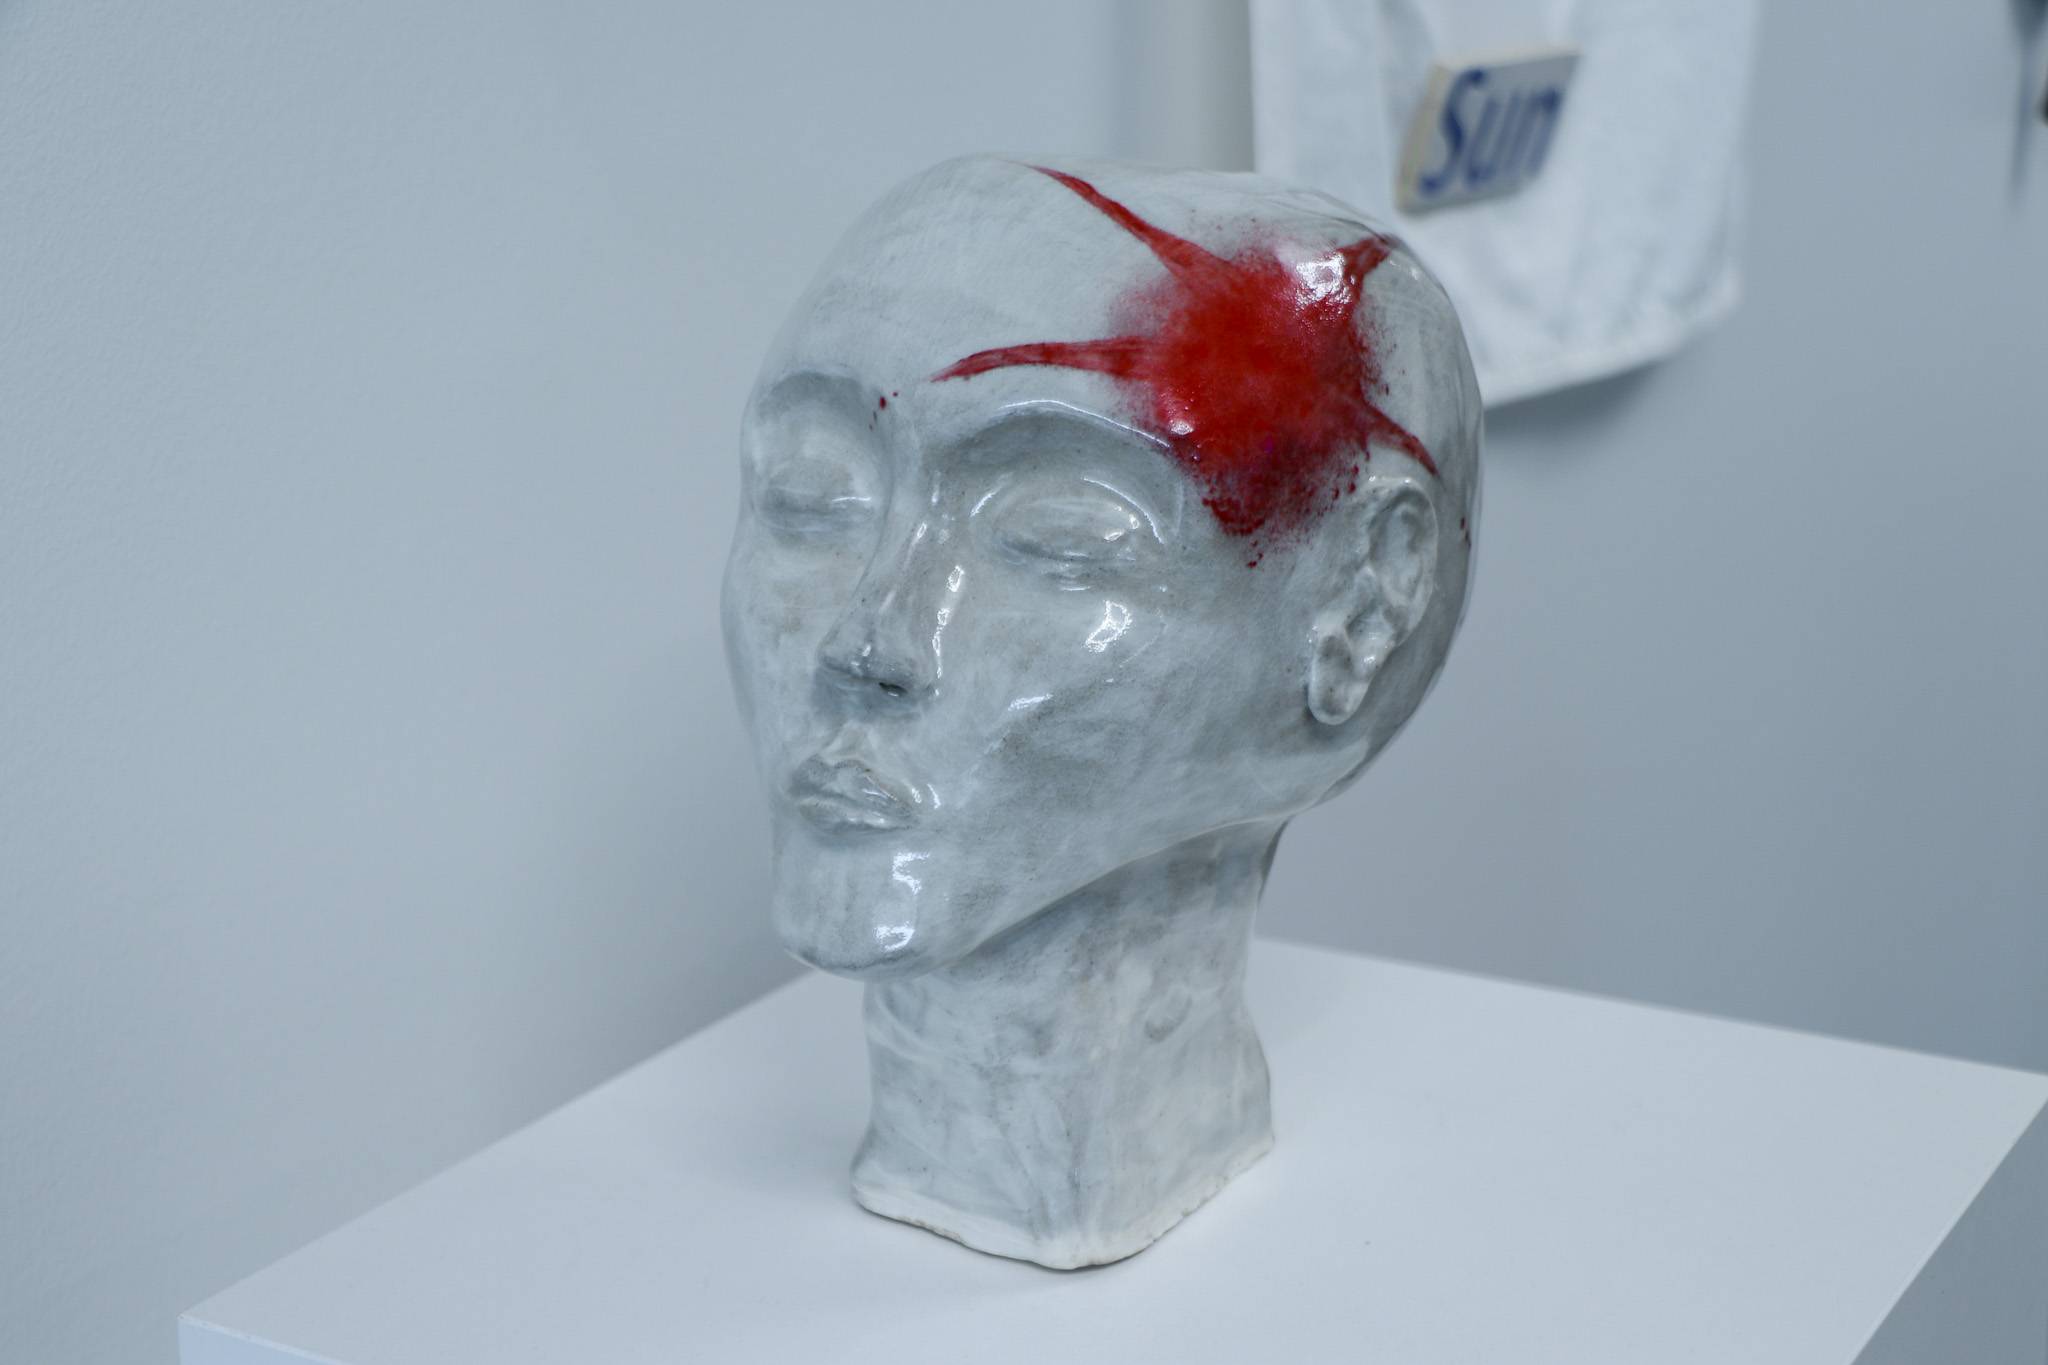 A head with a bloody injury